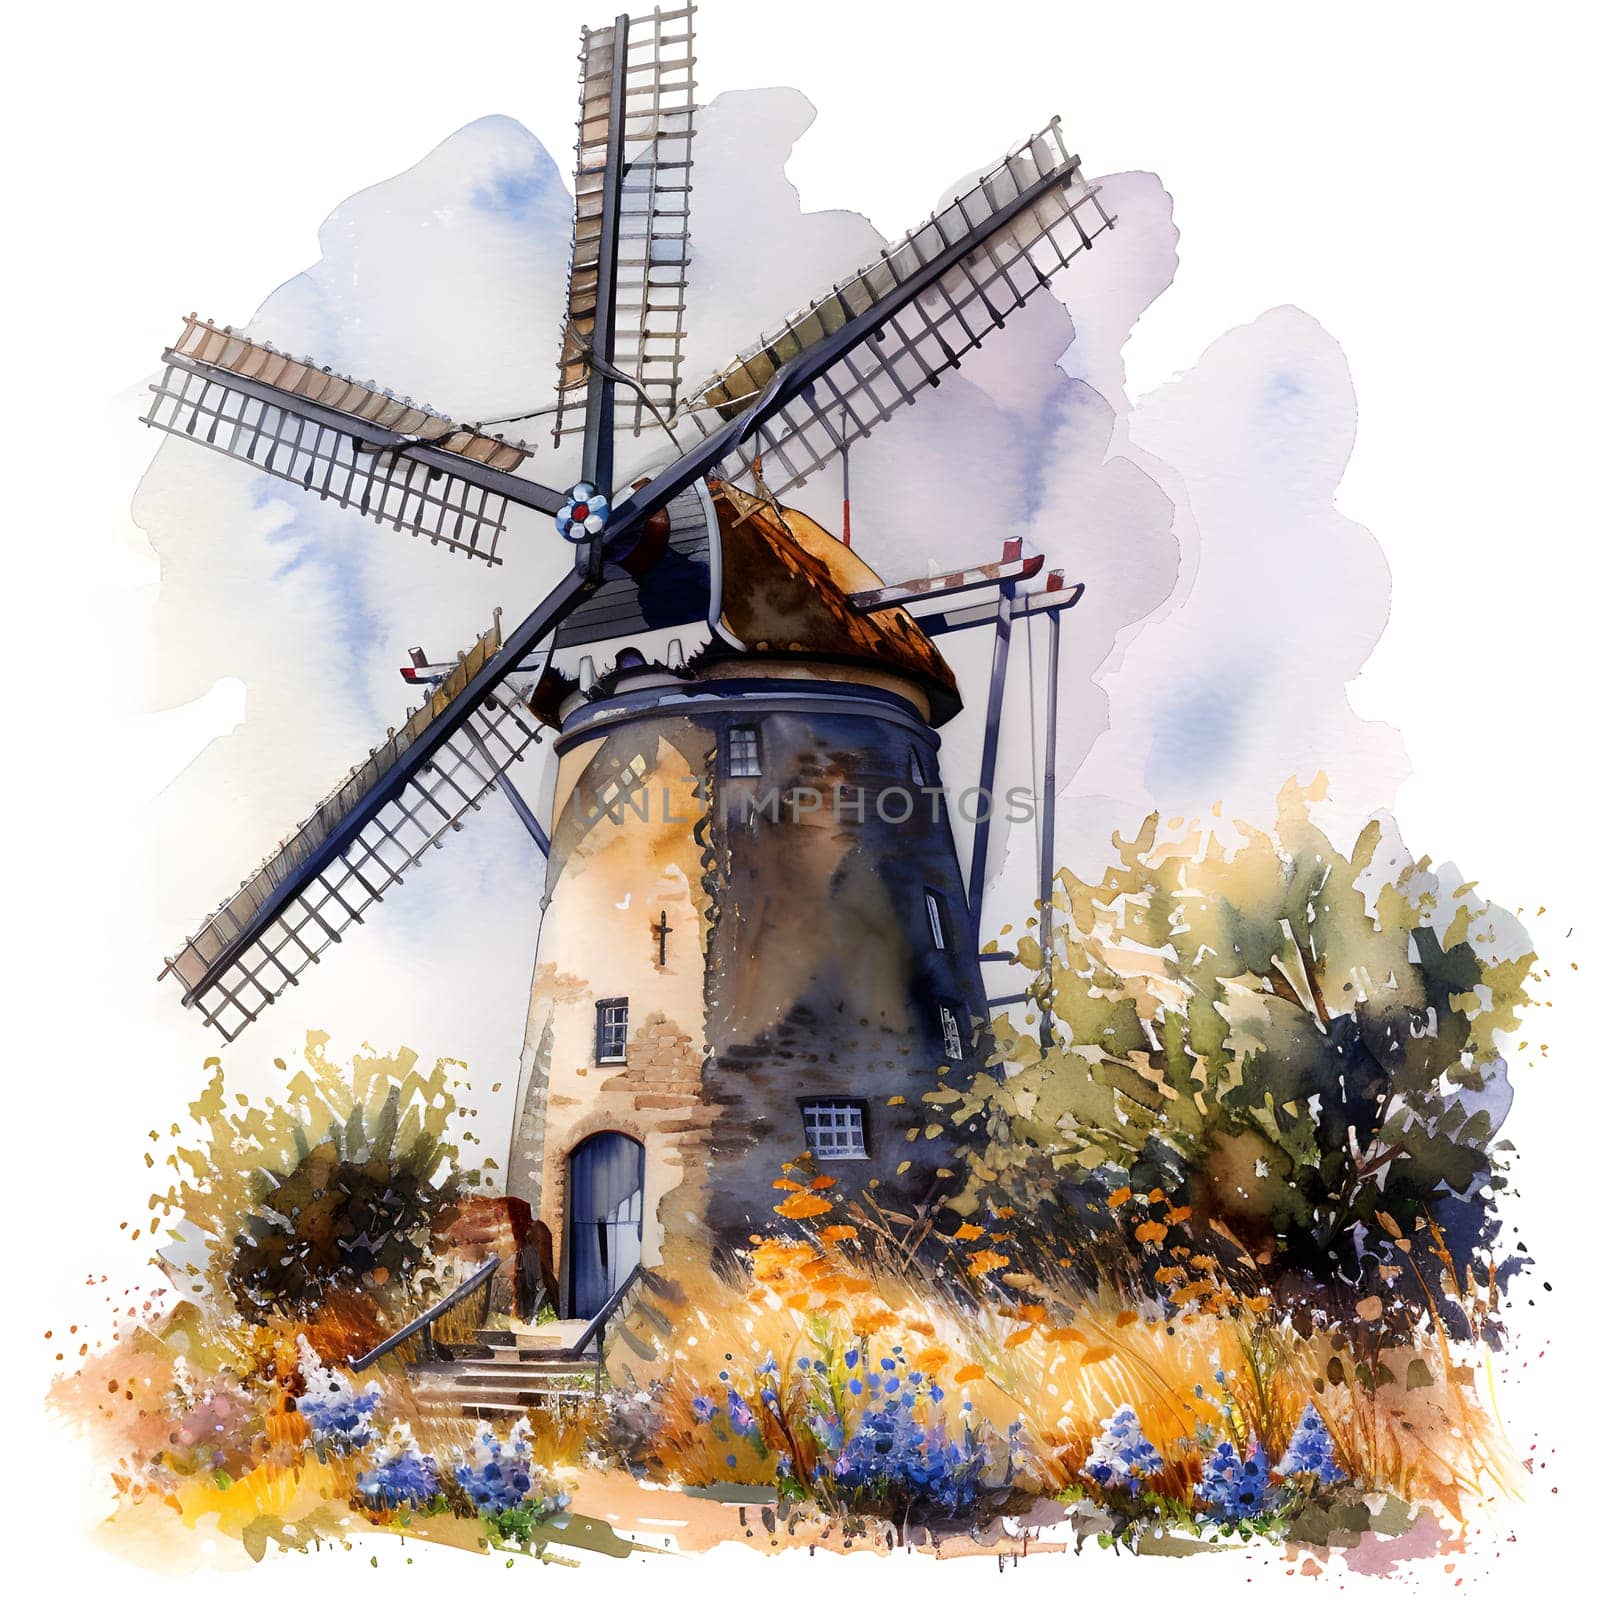 A watercolor artwork of a windmill in a natural landscape by Nadtochiy